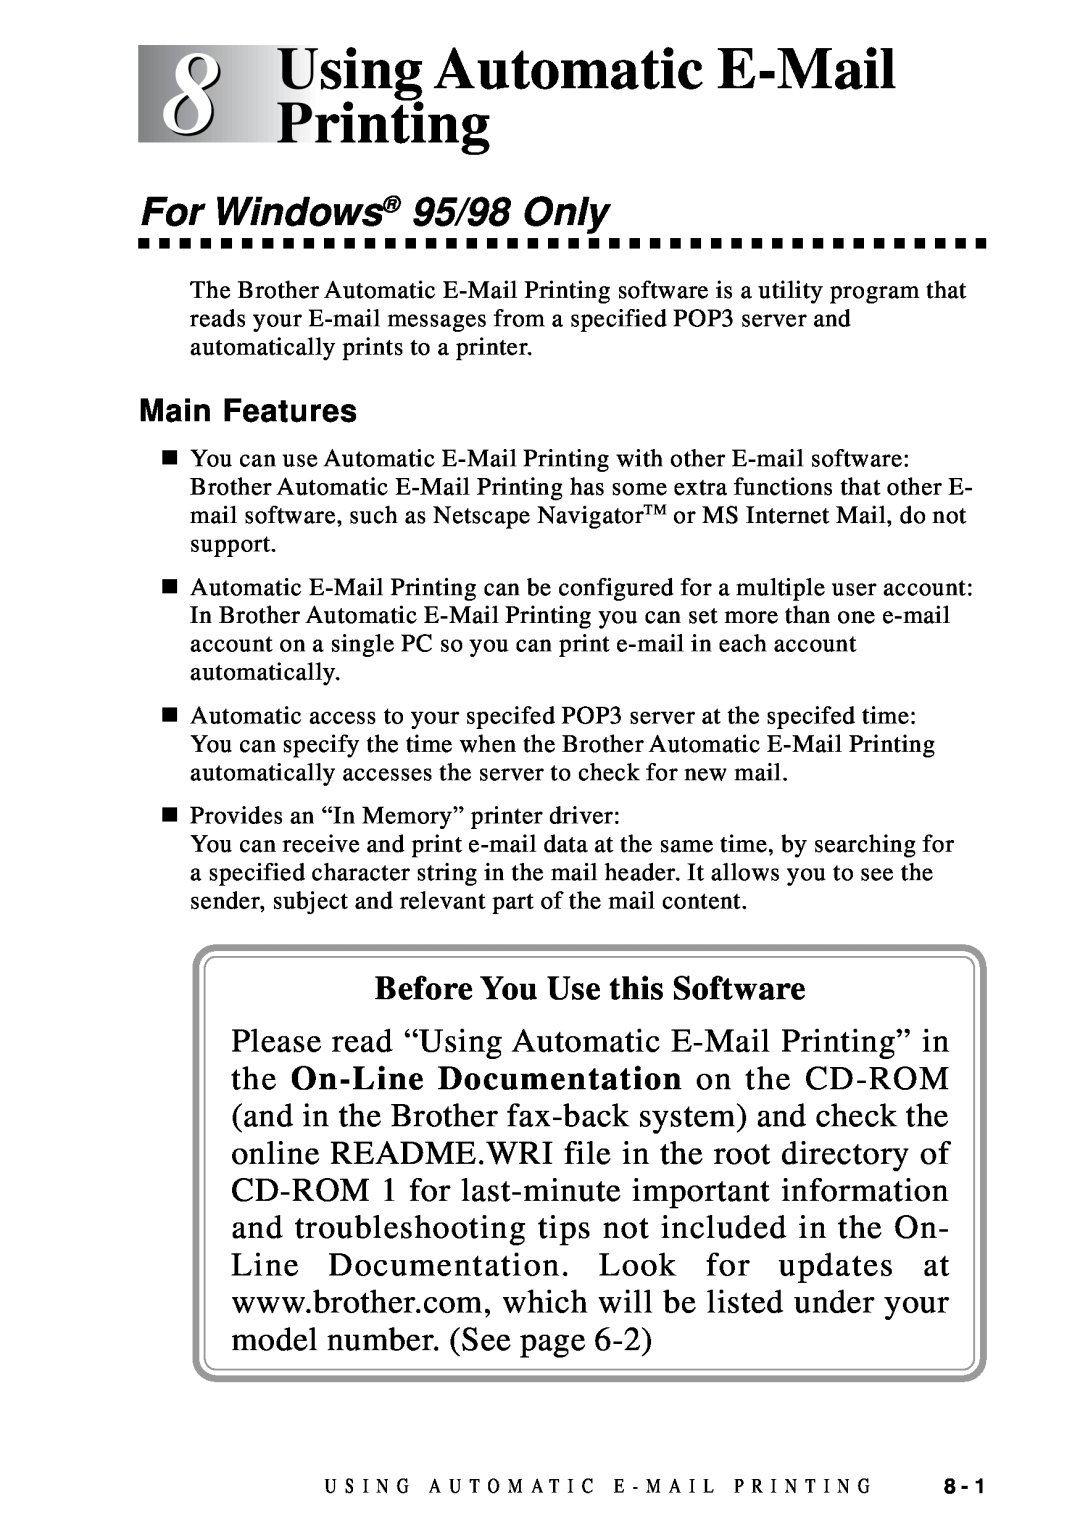 Brother DCP1200 manual Using Automatic E-Mail Printing, For Windows 95/98 Only, Main Features, Before You Use this Software 